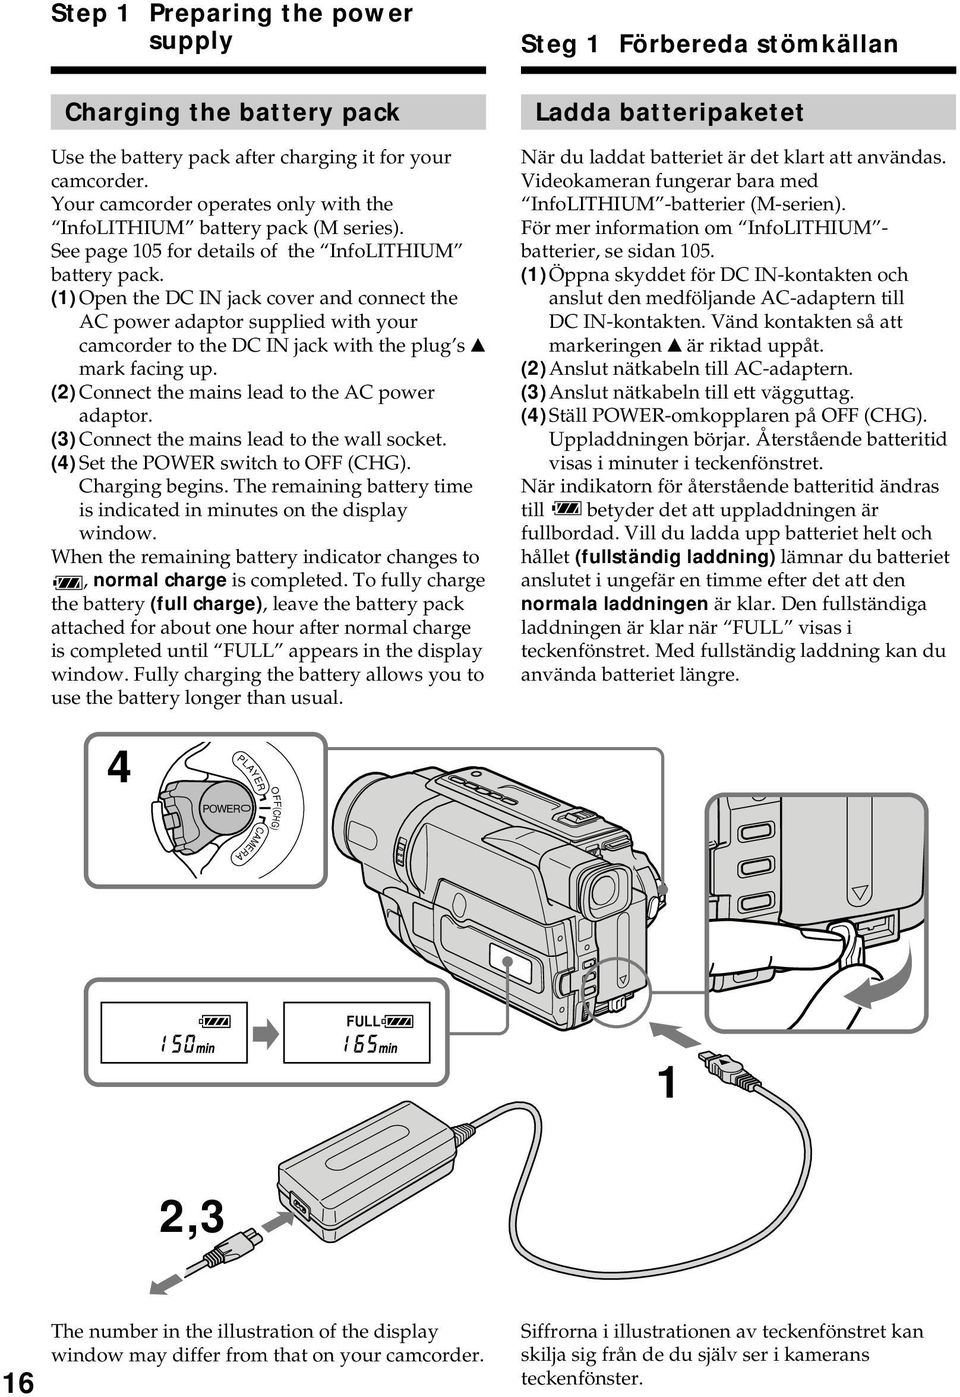 (1) Open the DC IN jack cover and connect the AC power adaptor supplied with your camcorder to the DC IN jack with the plug s v mark facing up. (2) Connect the mains lead to the AC power adaptor.